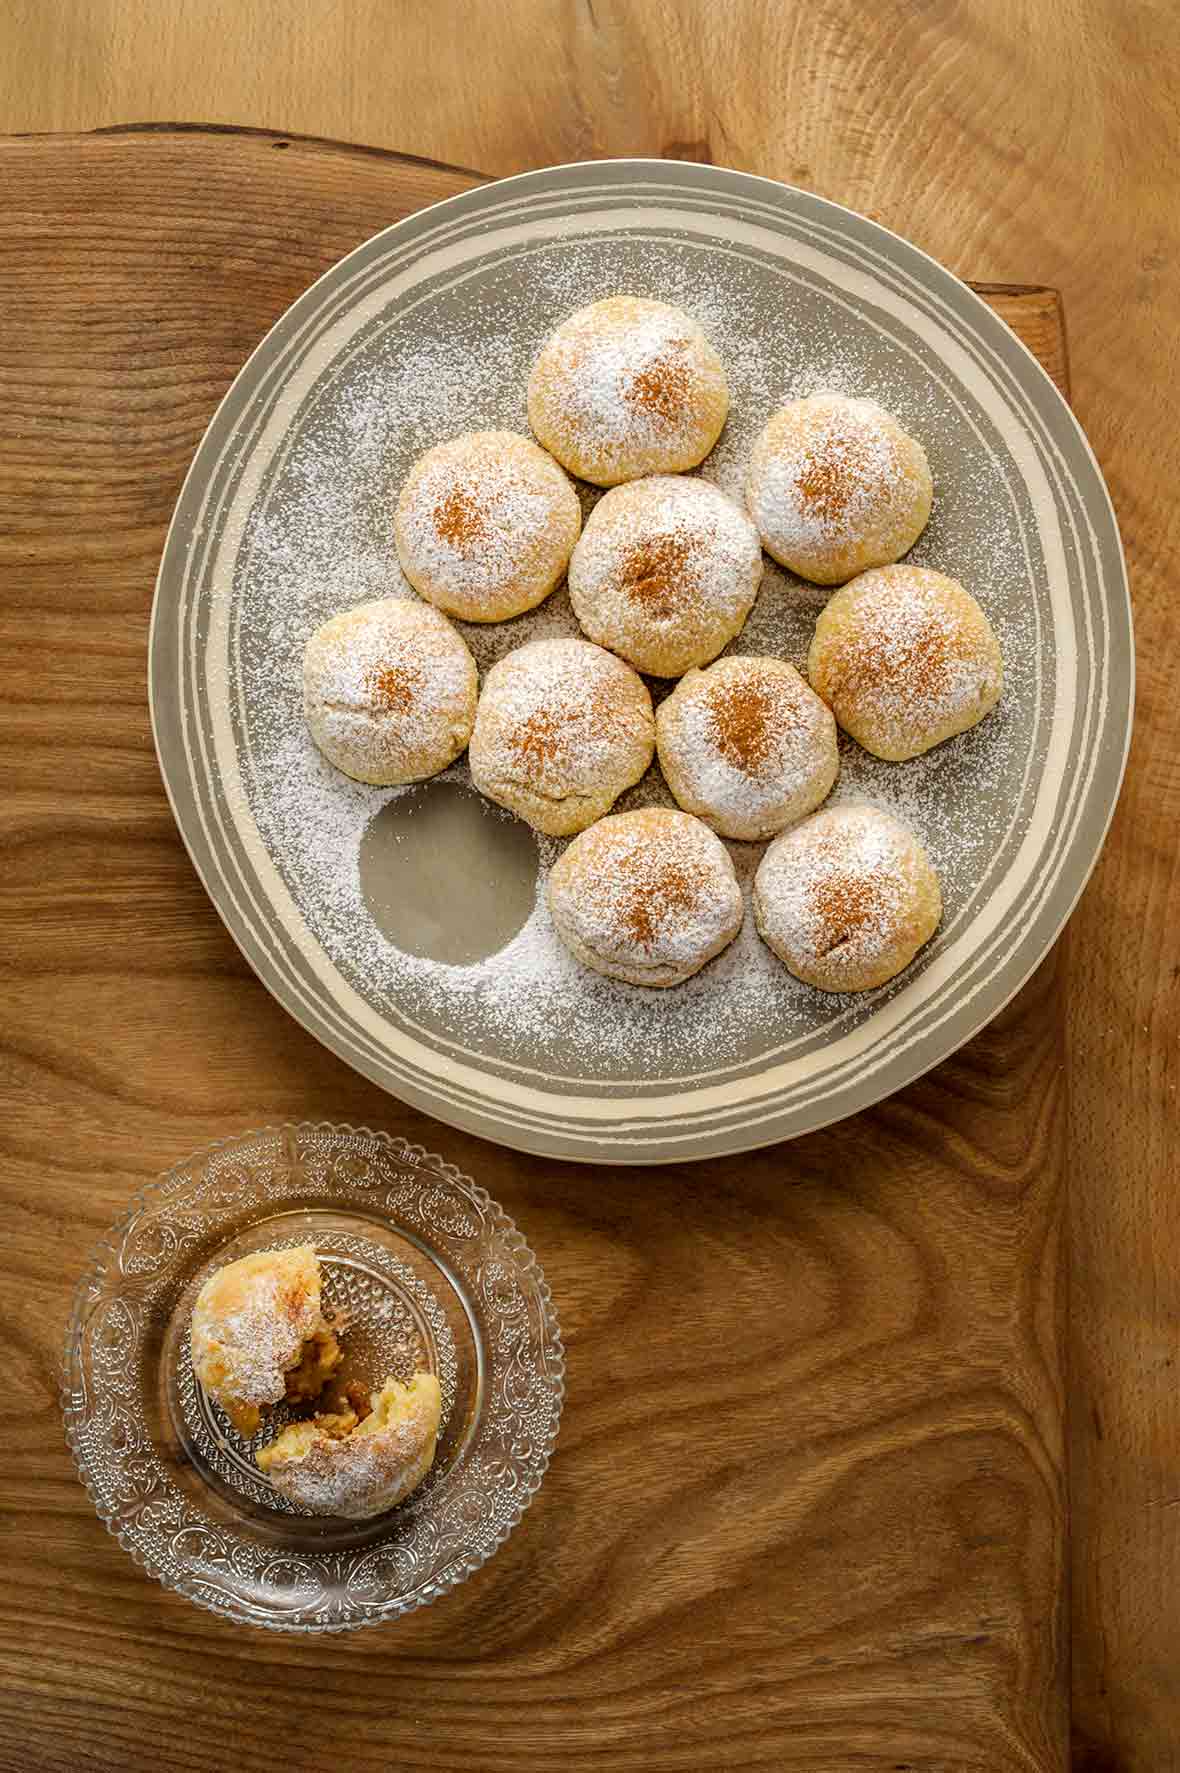 A plate of round Greek biscuit cookies with an apple filling, all dusted with powdered sugar